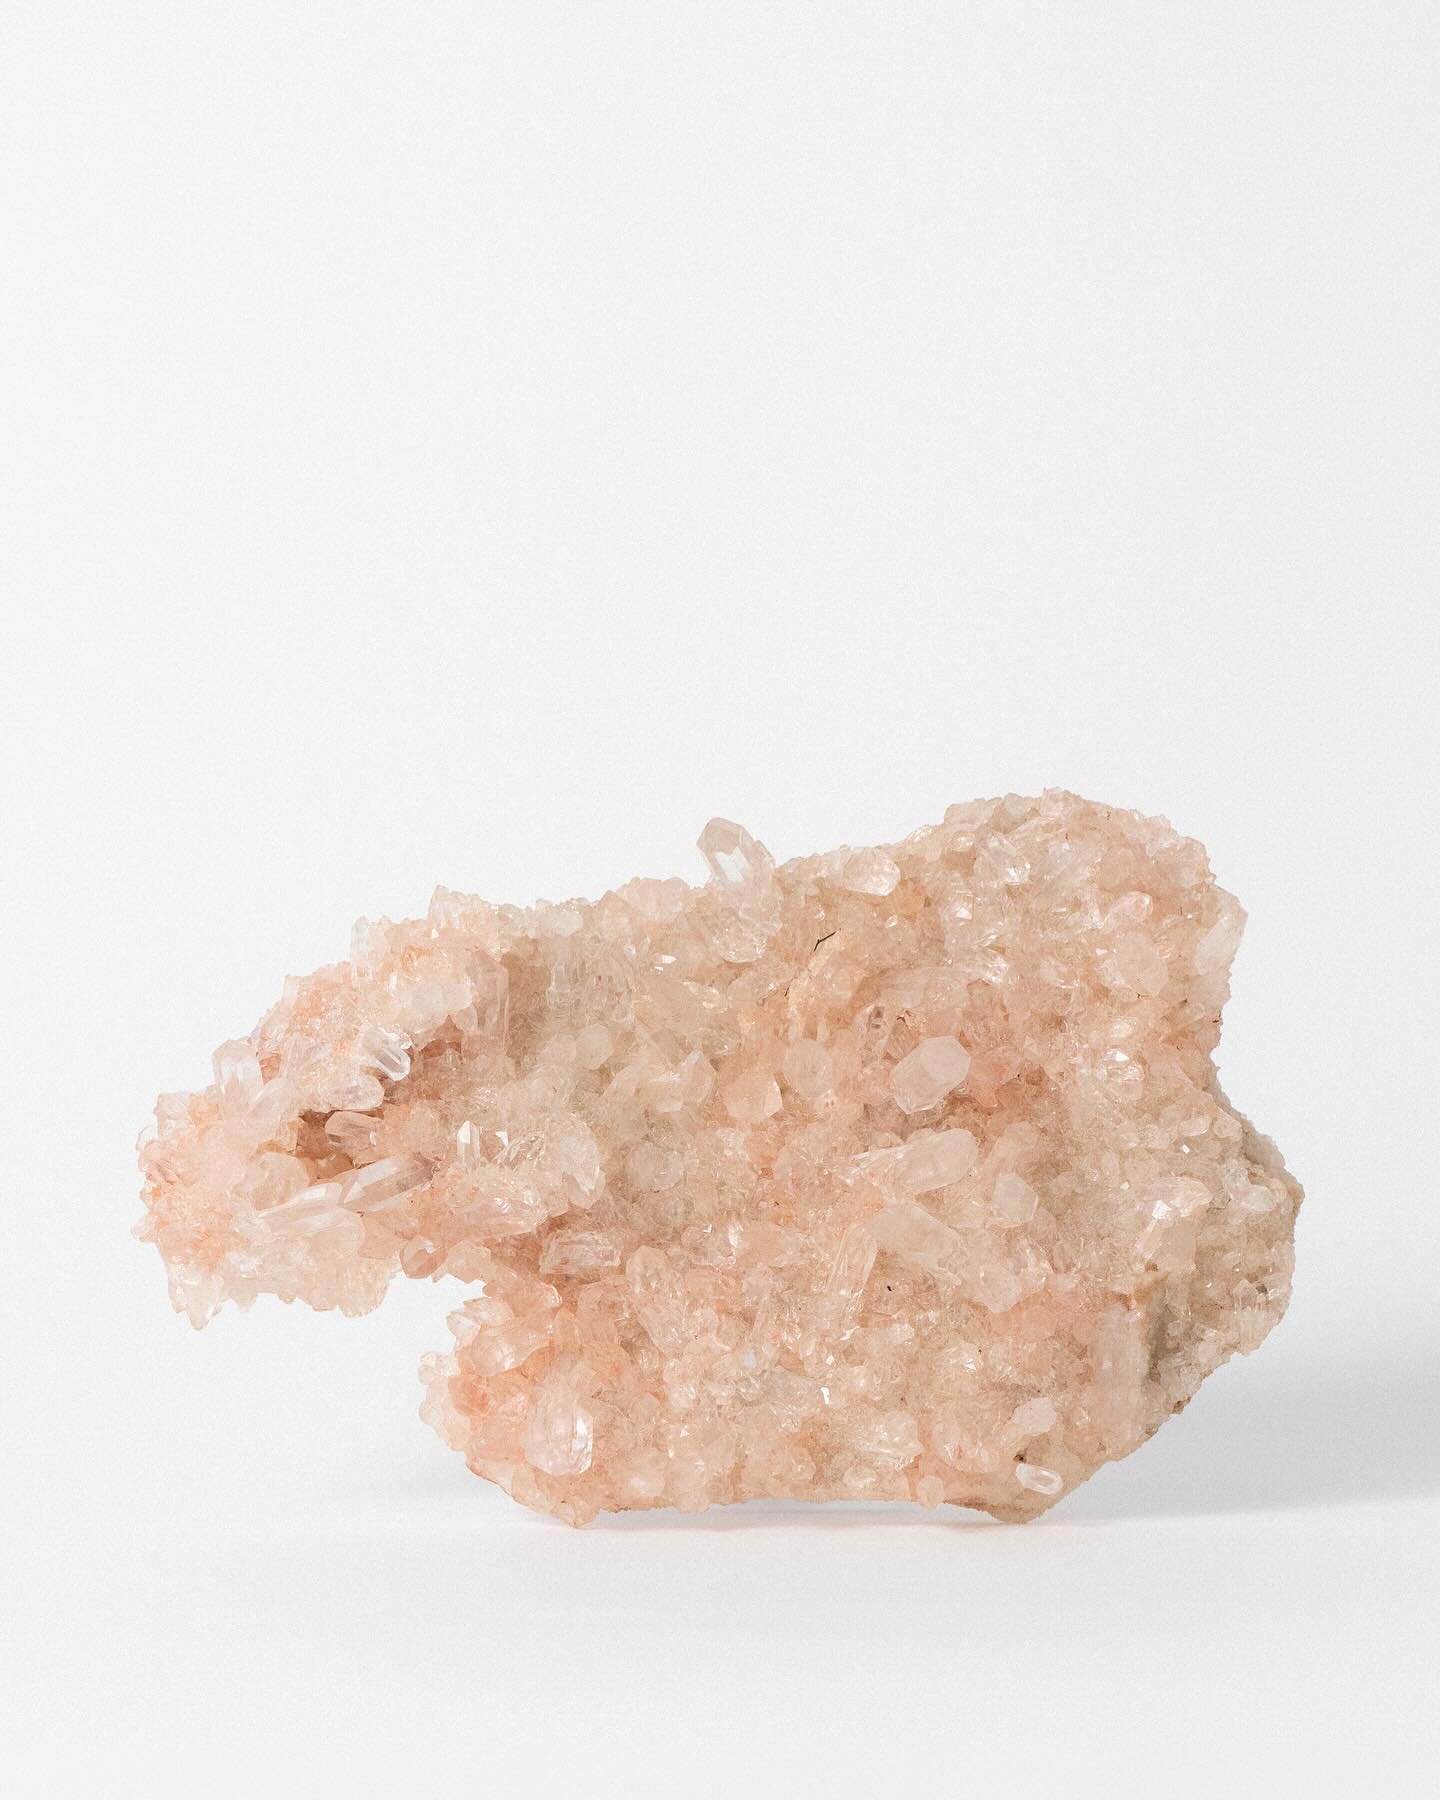 In the Shop &mdash; Samadhi Pink Himalayan Quartz cluster from Kullu Valley, Himachal Pradesh, India. There is nothing quite like the energy of this tinted peach quartz. It is soft, ethereal, and transporting.

#pinkquartz #himalayanquartz #pinkhimal